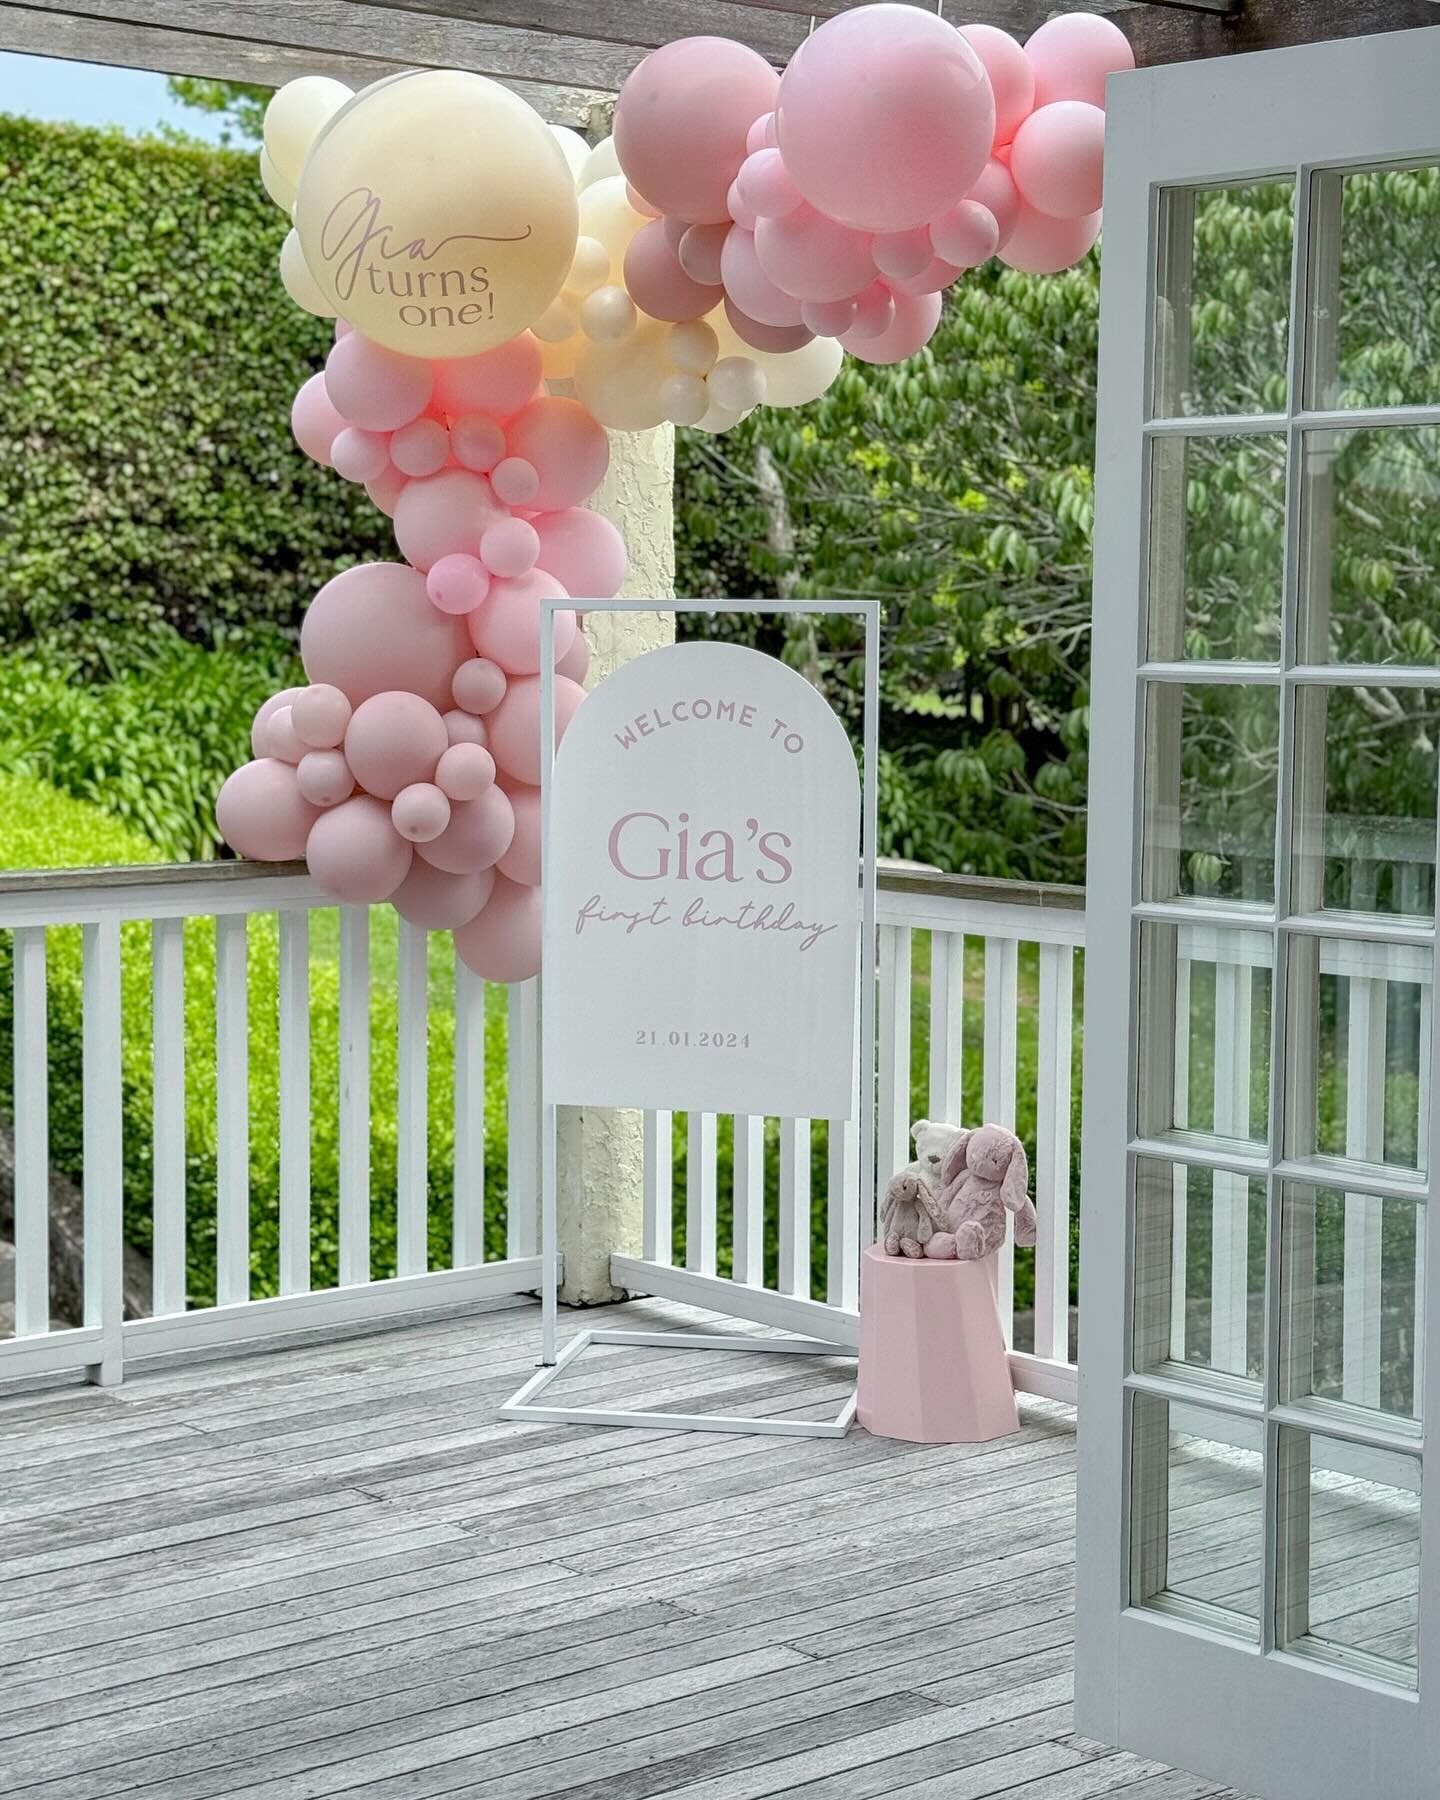 Happy 1st birthday Gia 💕

We had the privilege of creating the most beautiful backdrop for @clairemoros baby shower. Fast forward a year, and here we are again with another beautiful display for baby Gia&rsquo;s very first birthday.

🩷

We love bei